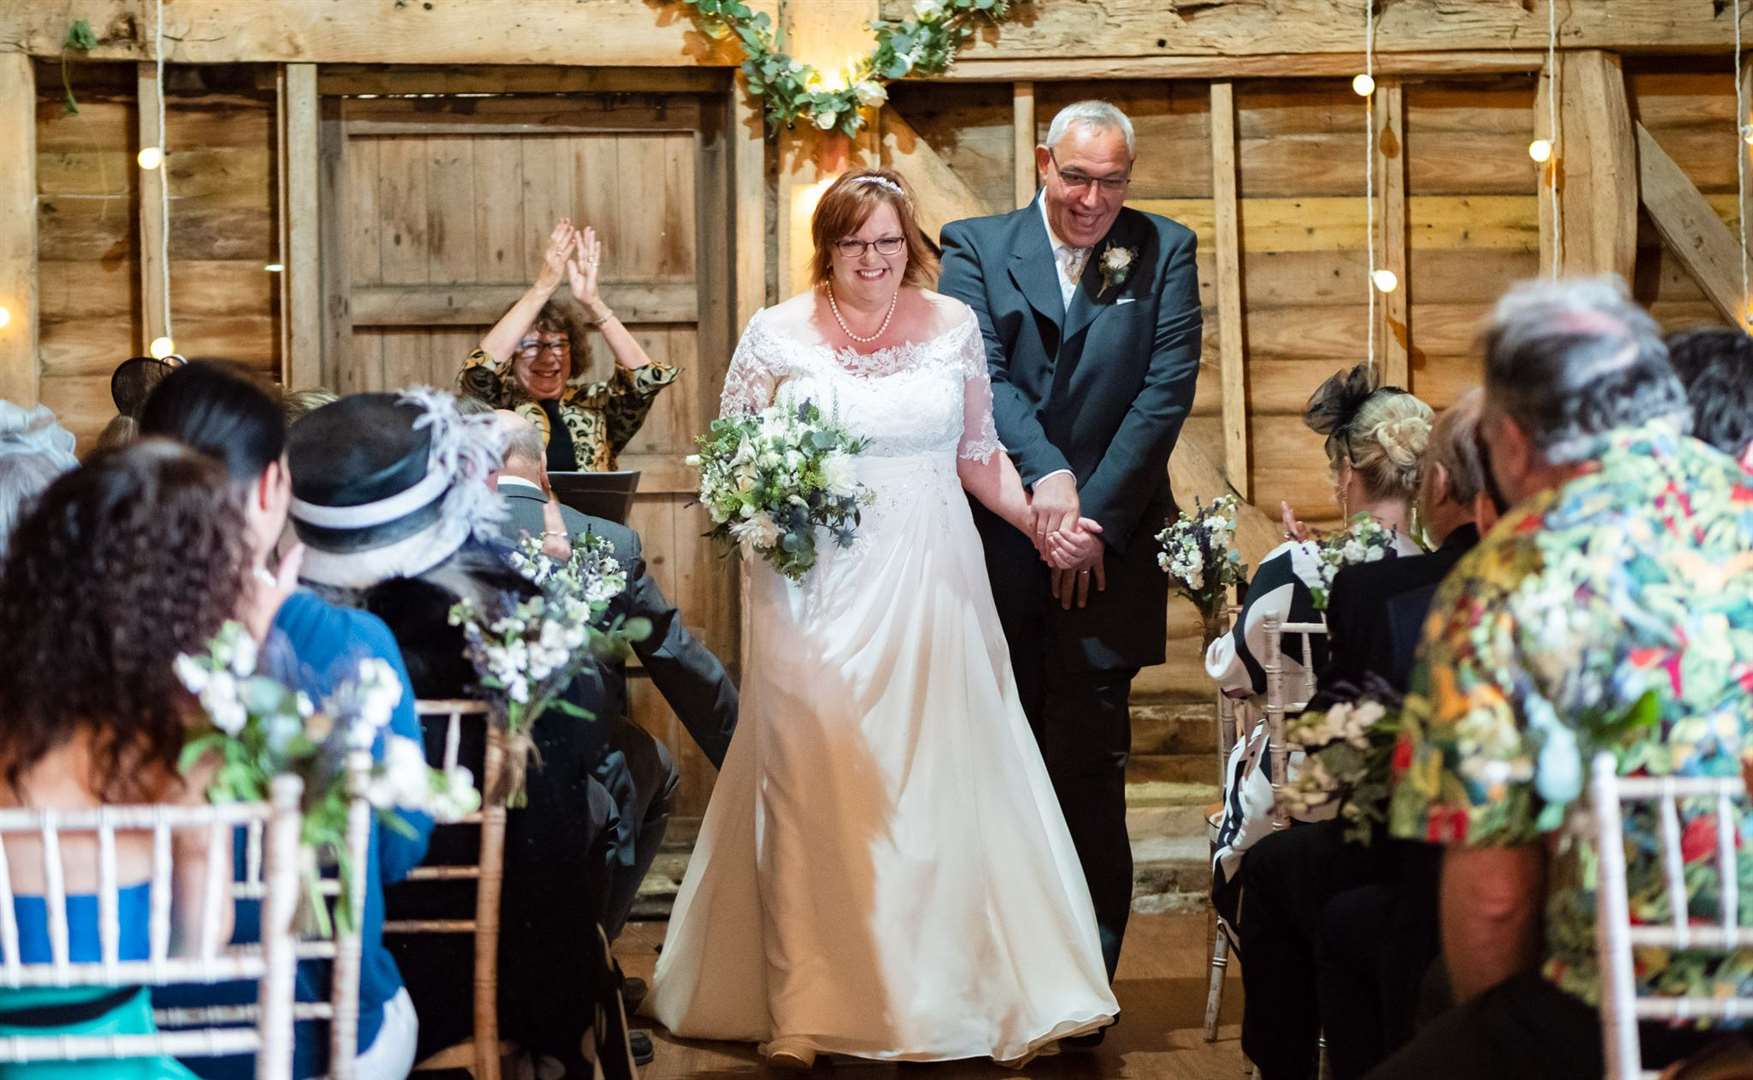 Felicity pictured marrying a couple in Tenterden in 2019